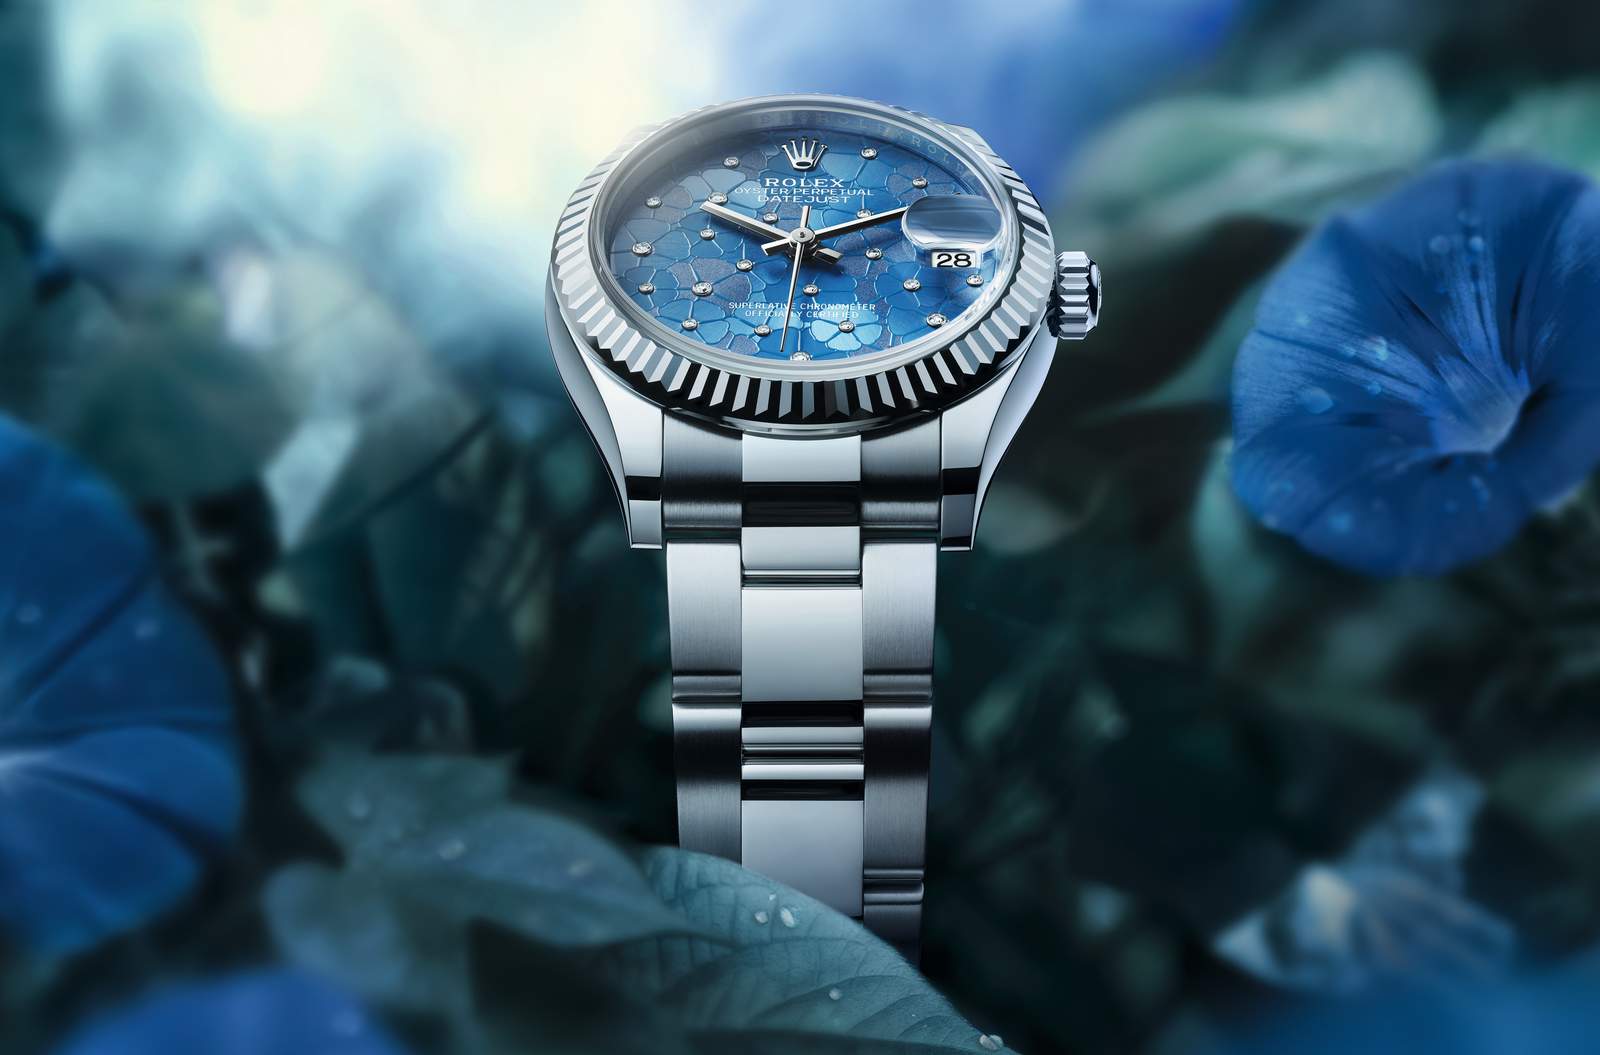 The new Rolex Oyster Perpetual Datejust 31 looks charming with floral dials, unique colors, and oodles of oomph